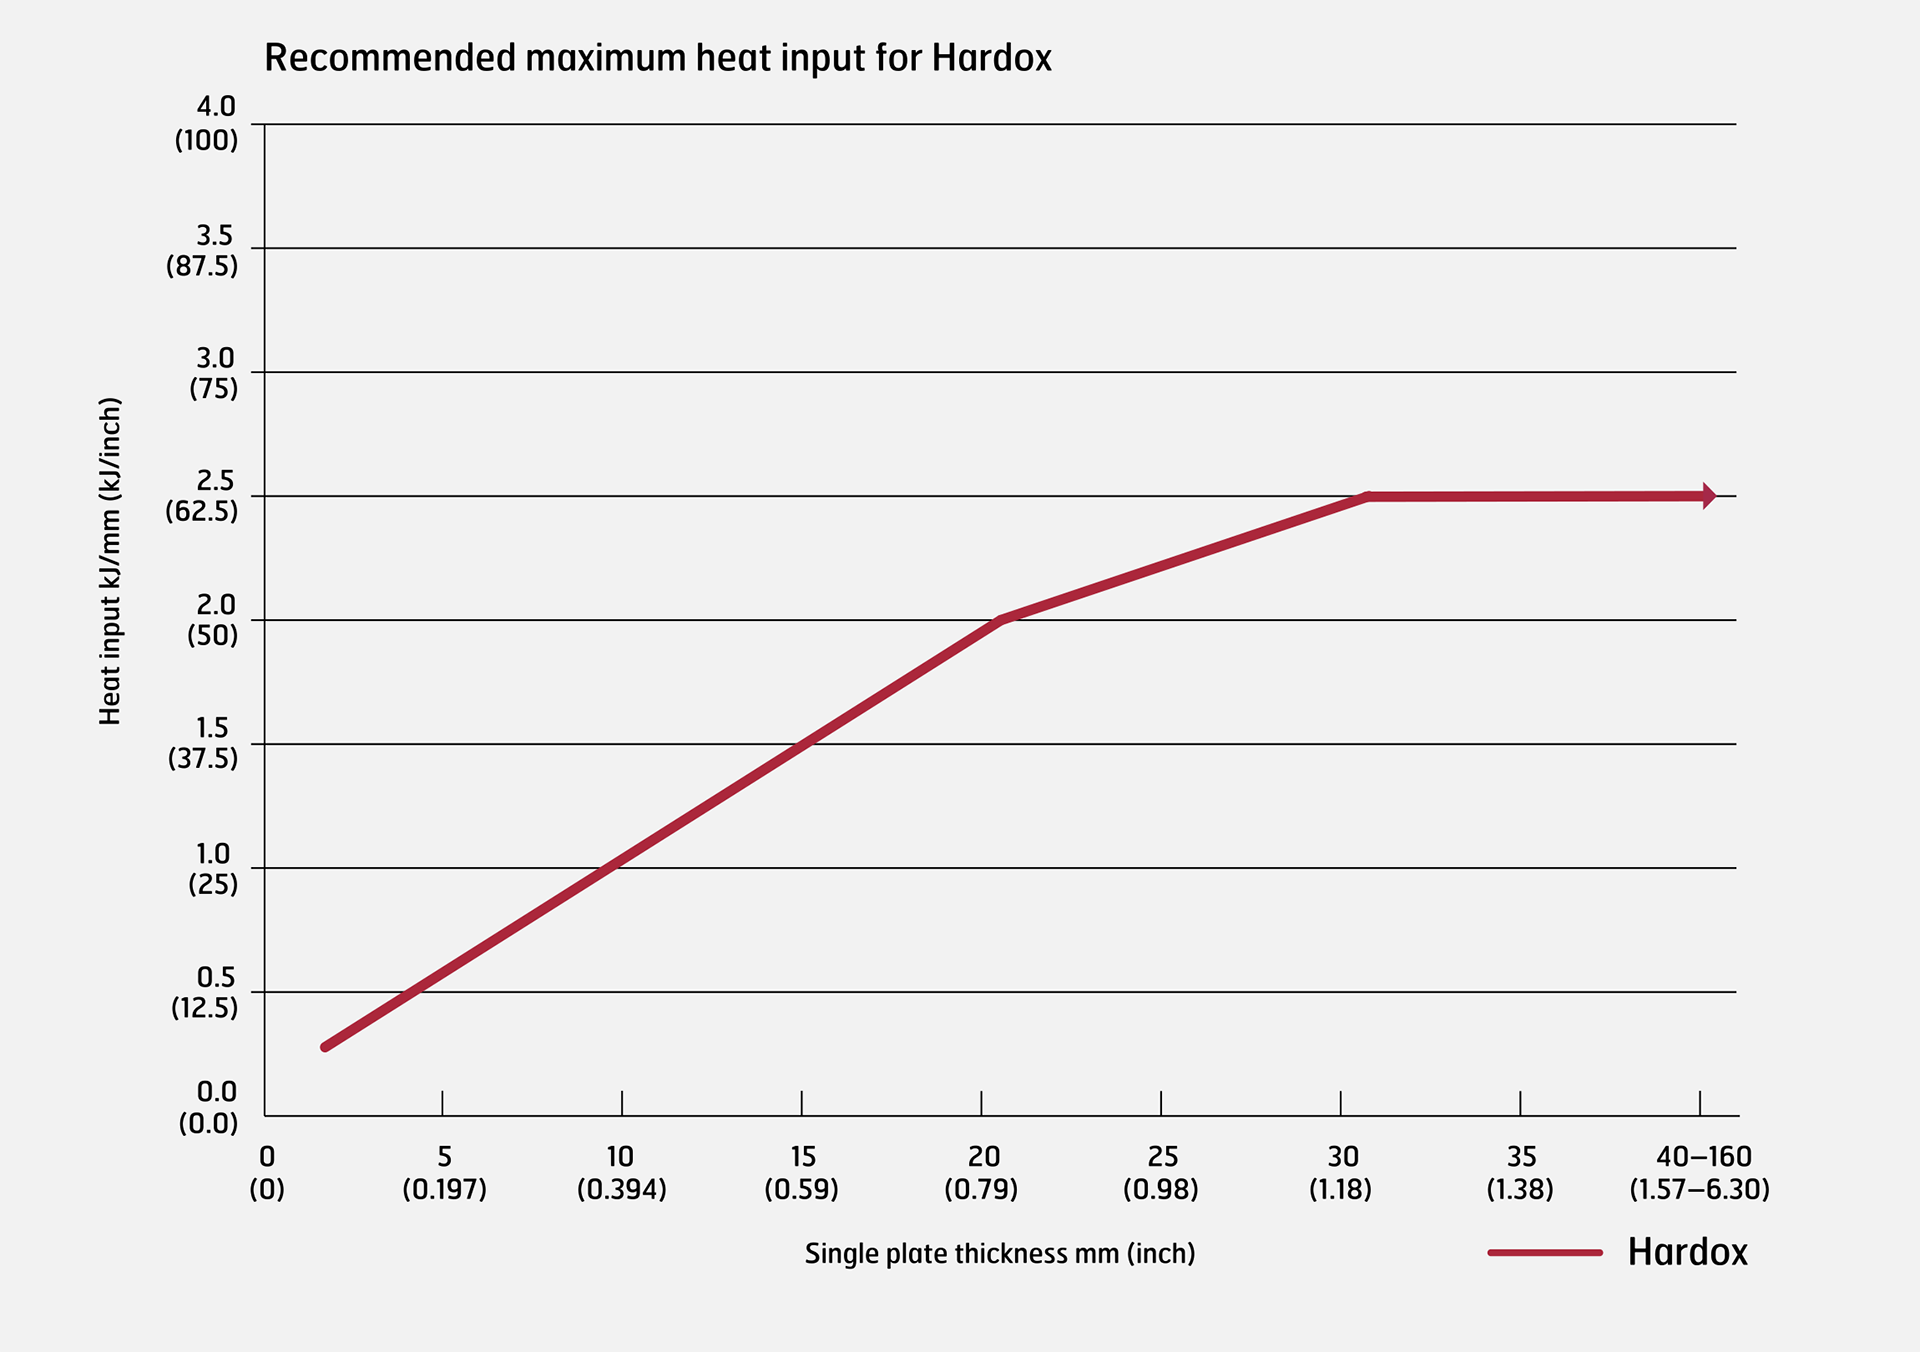 Recommended maximum heat input for Hardox wear plate